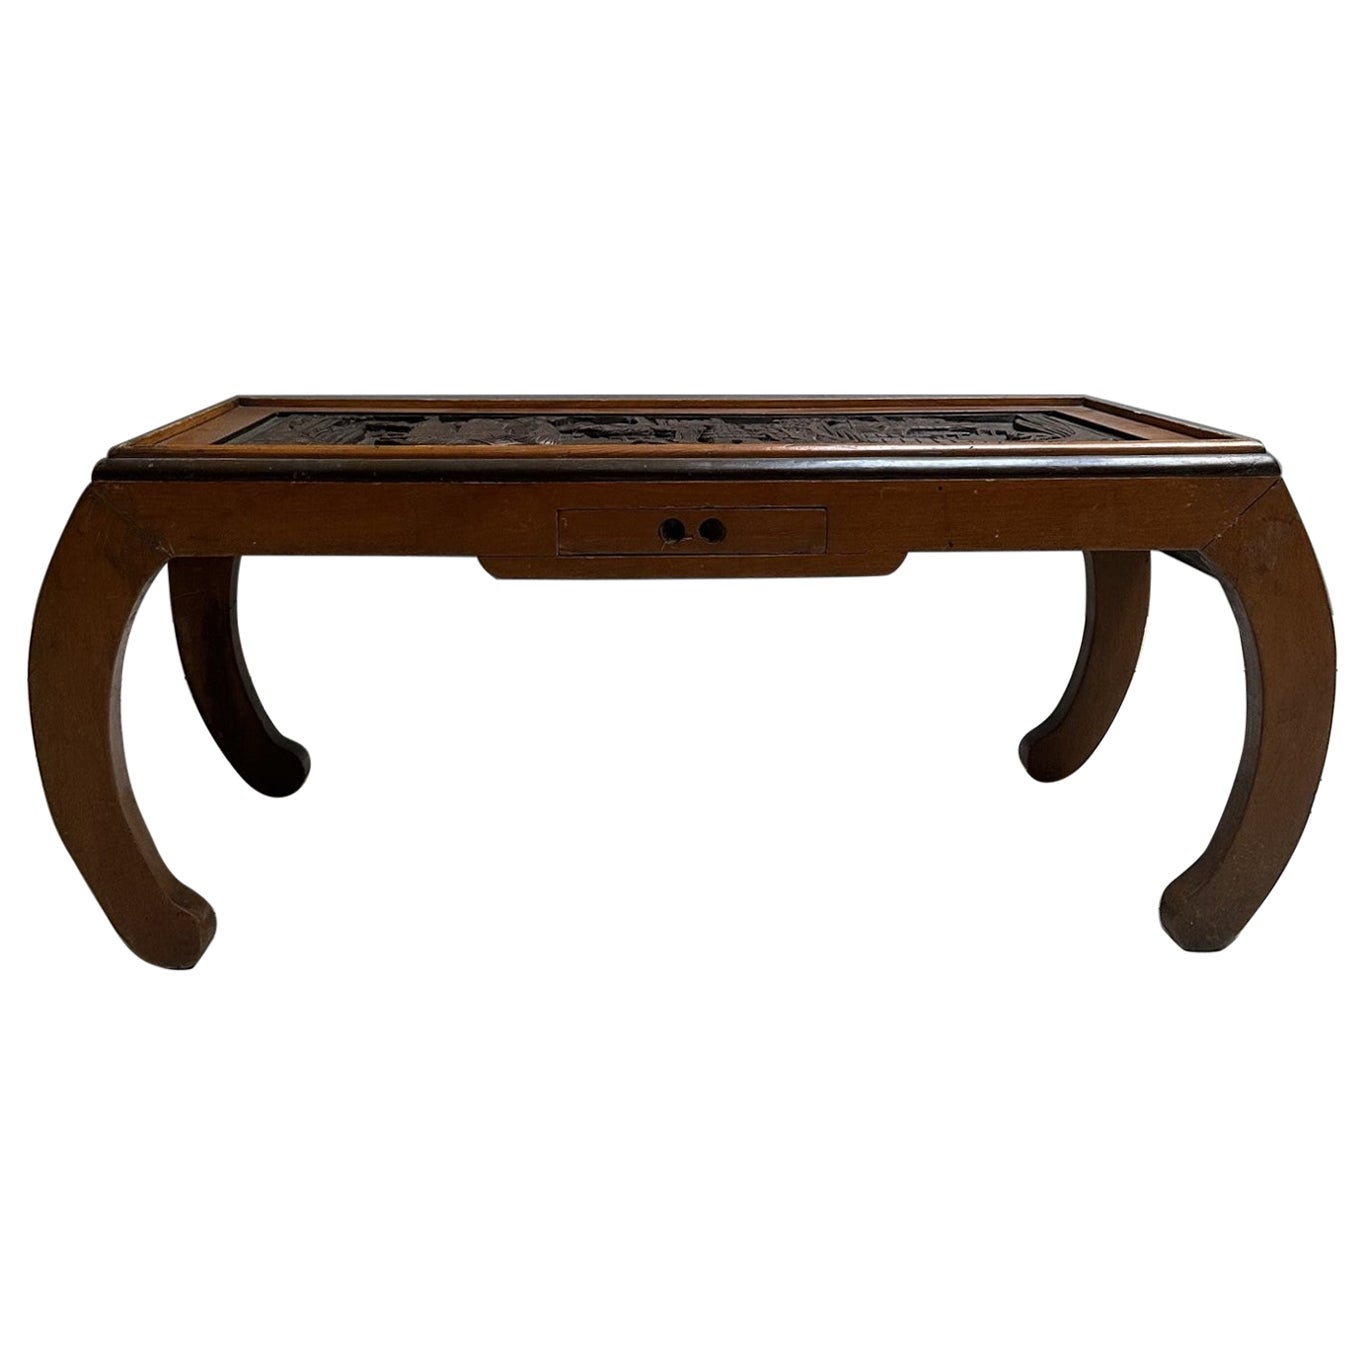  70s rectangular Chinese coffee table in inlaid wood, with drawerb For Sale